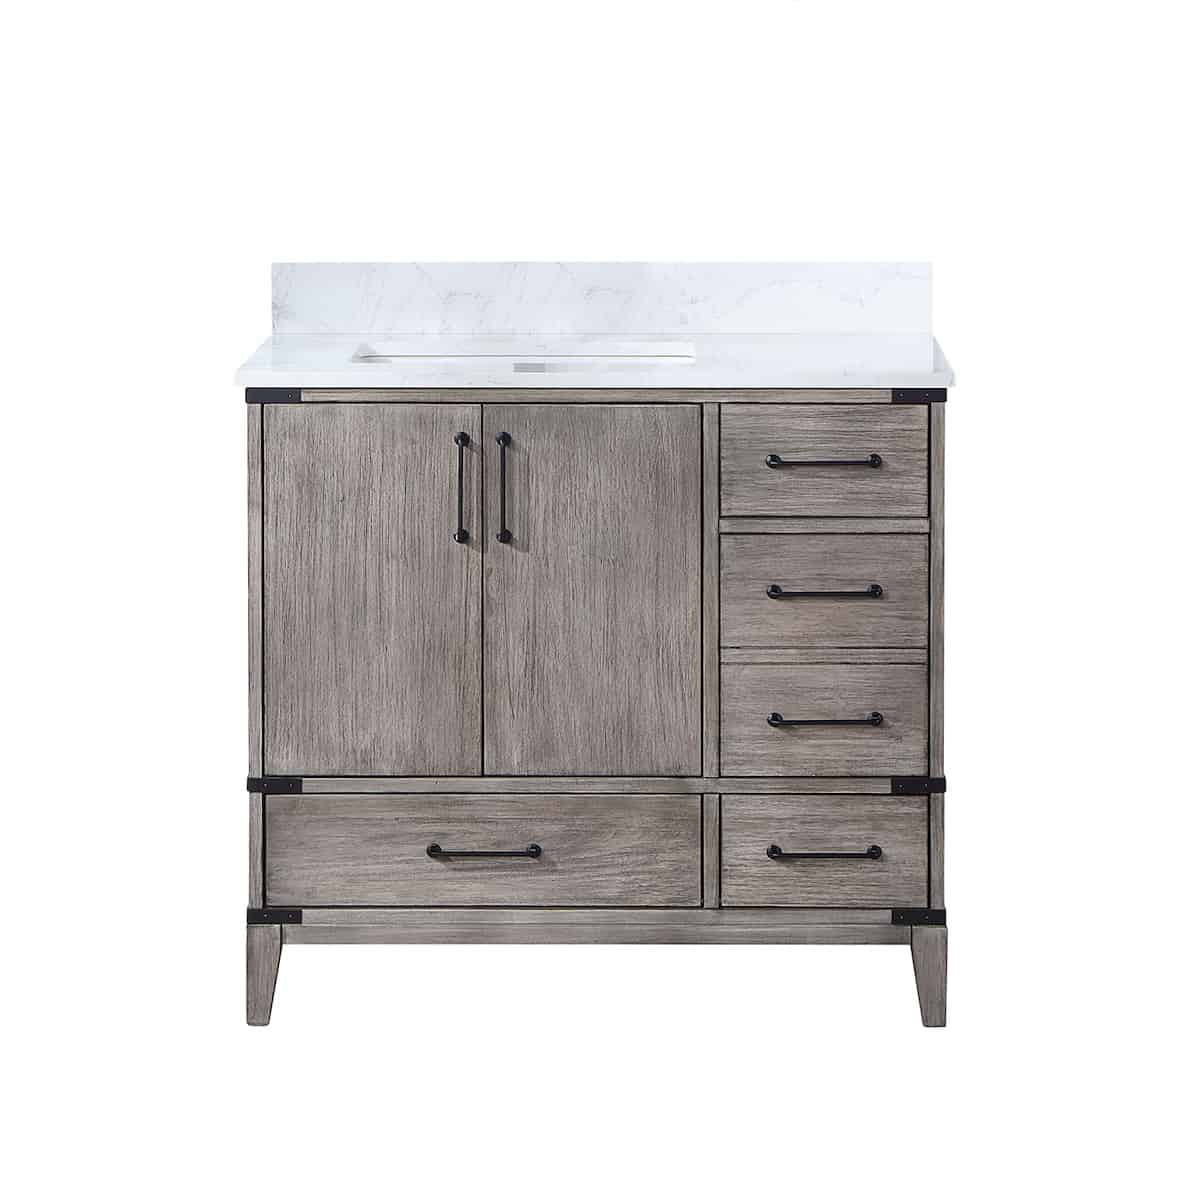 Vinnova Zaragoza 36 Inch Freestanding Single Sink Bath Vanity in Classical Grey with White Composite Grain Stone Countertop Without Mirror 799036-CR-GW-NM